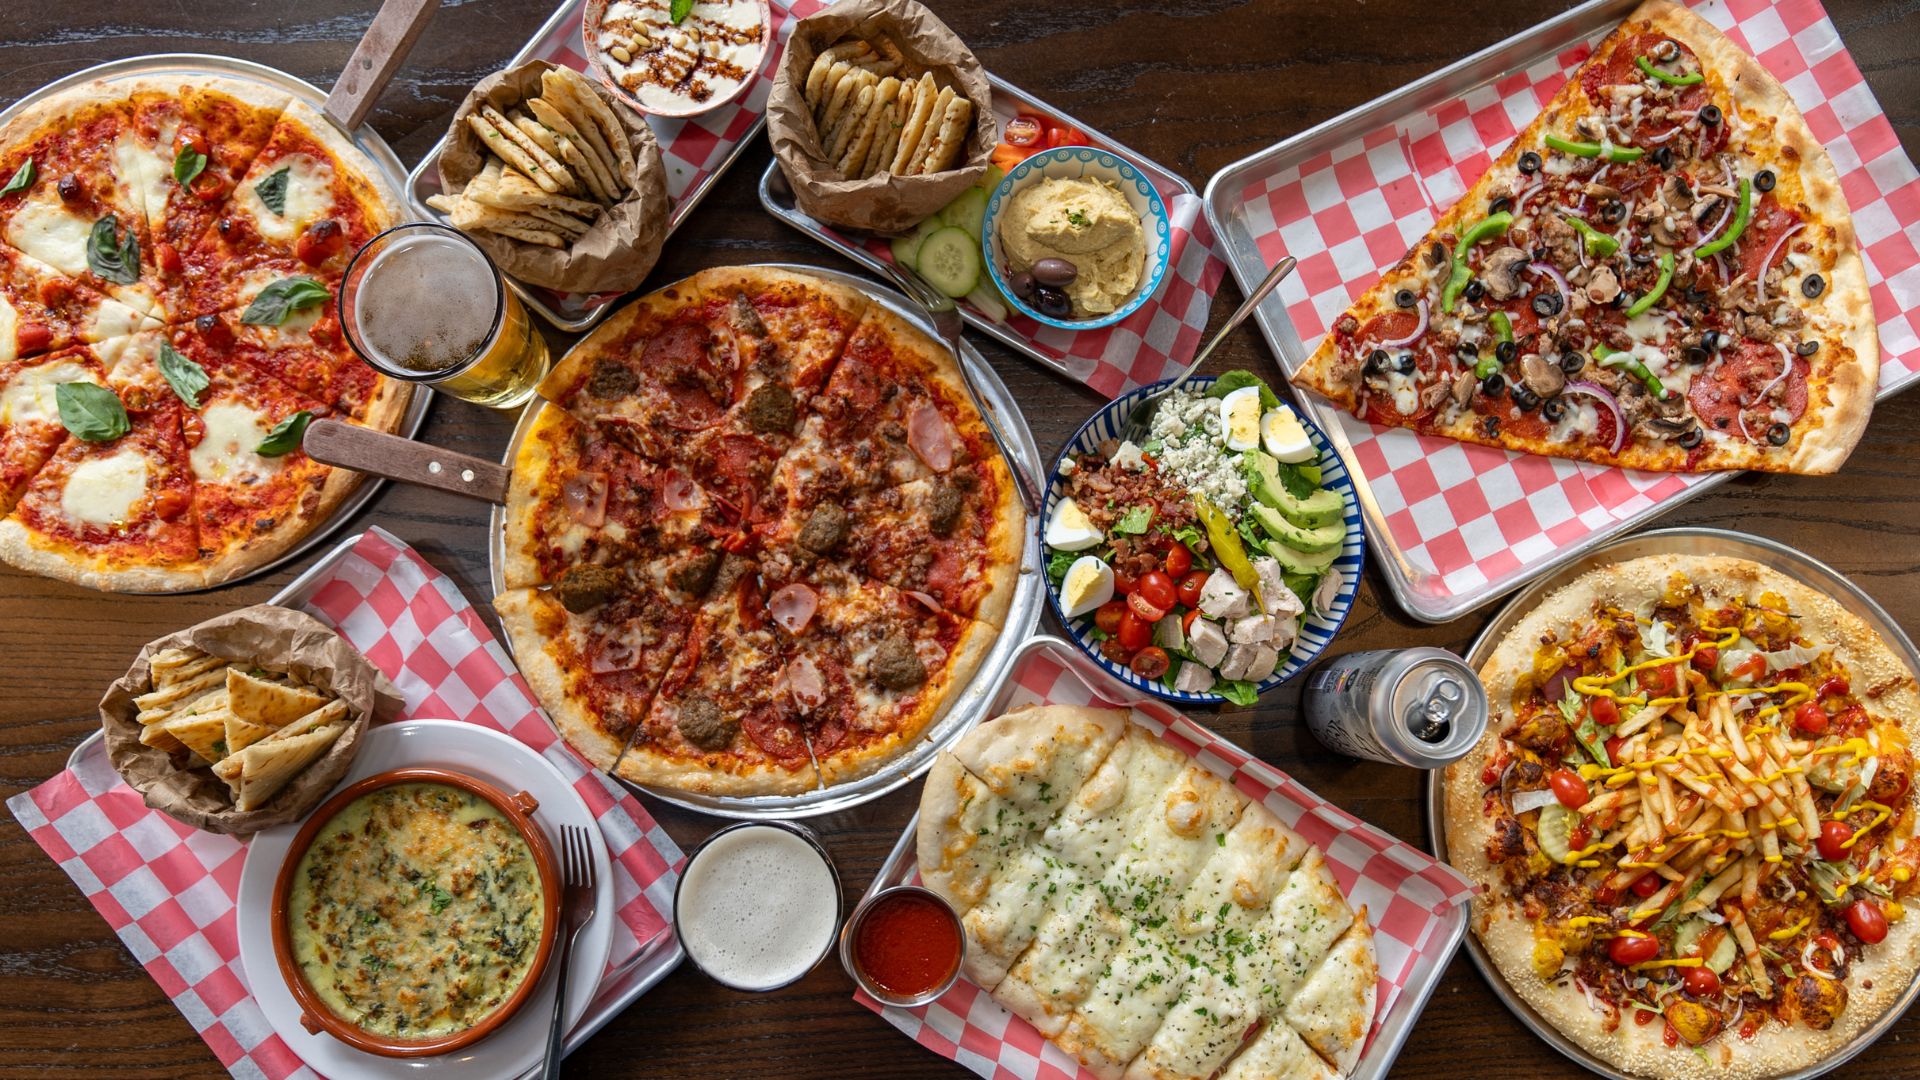 A spread at Hot Pizza Cold Beer includes pizza, dips, salads and beer.